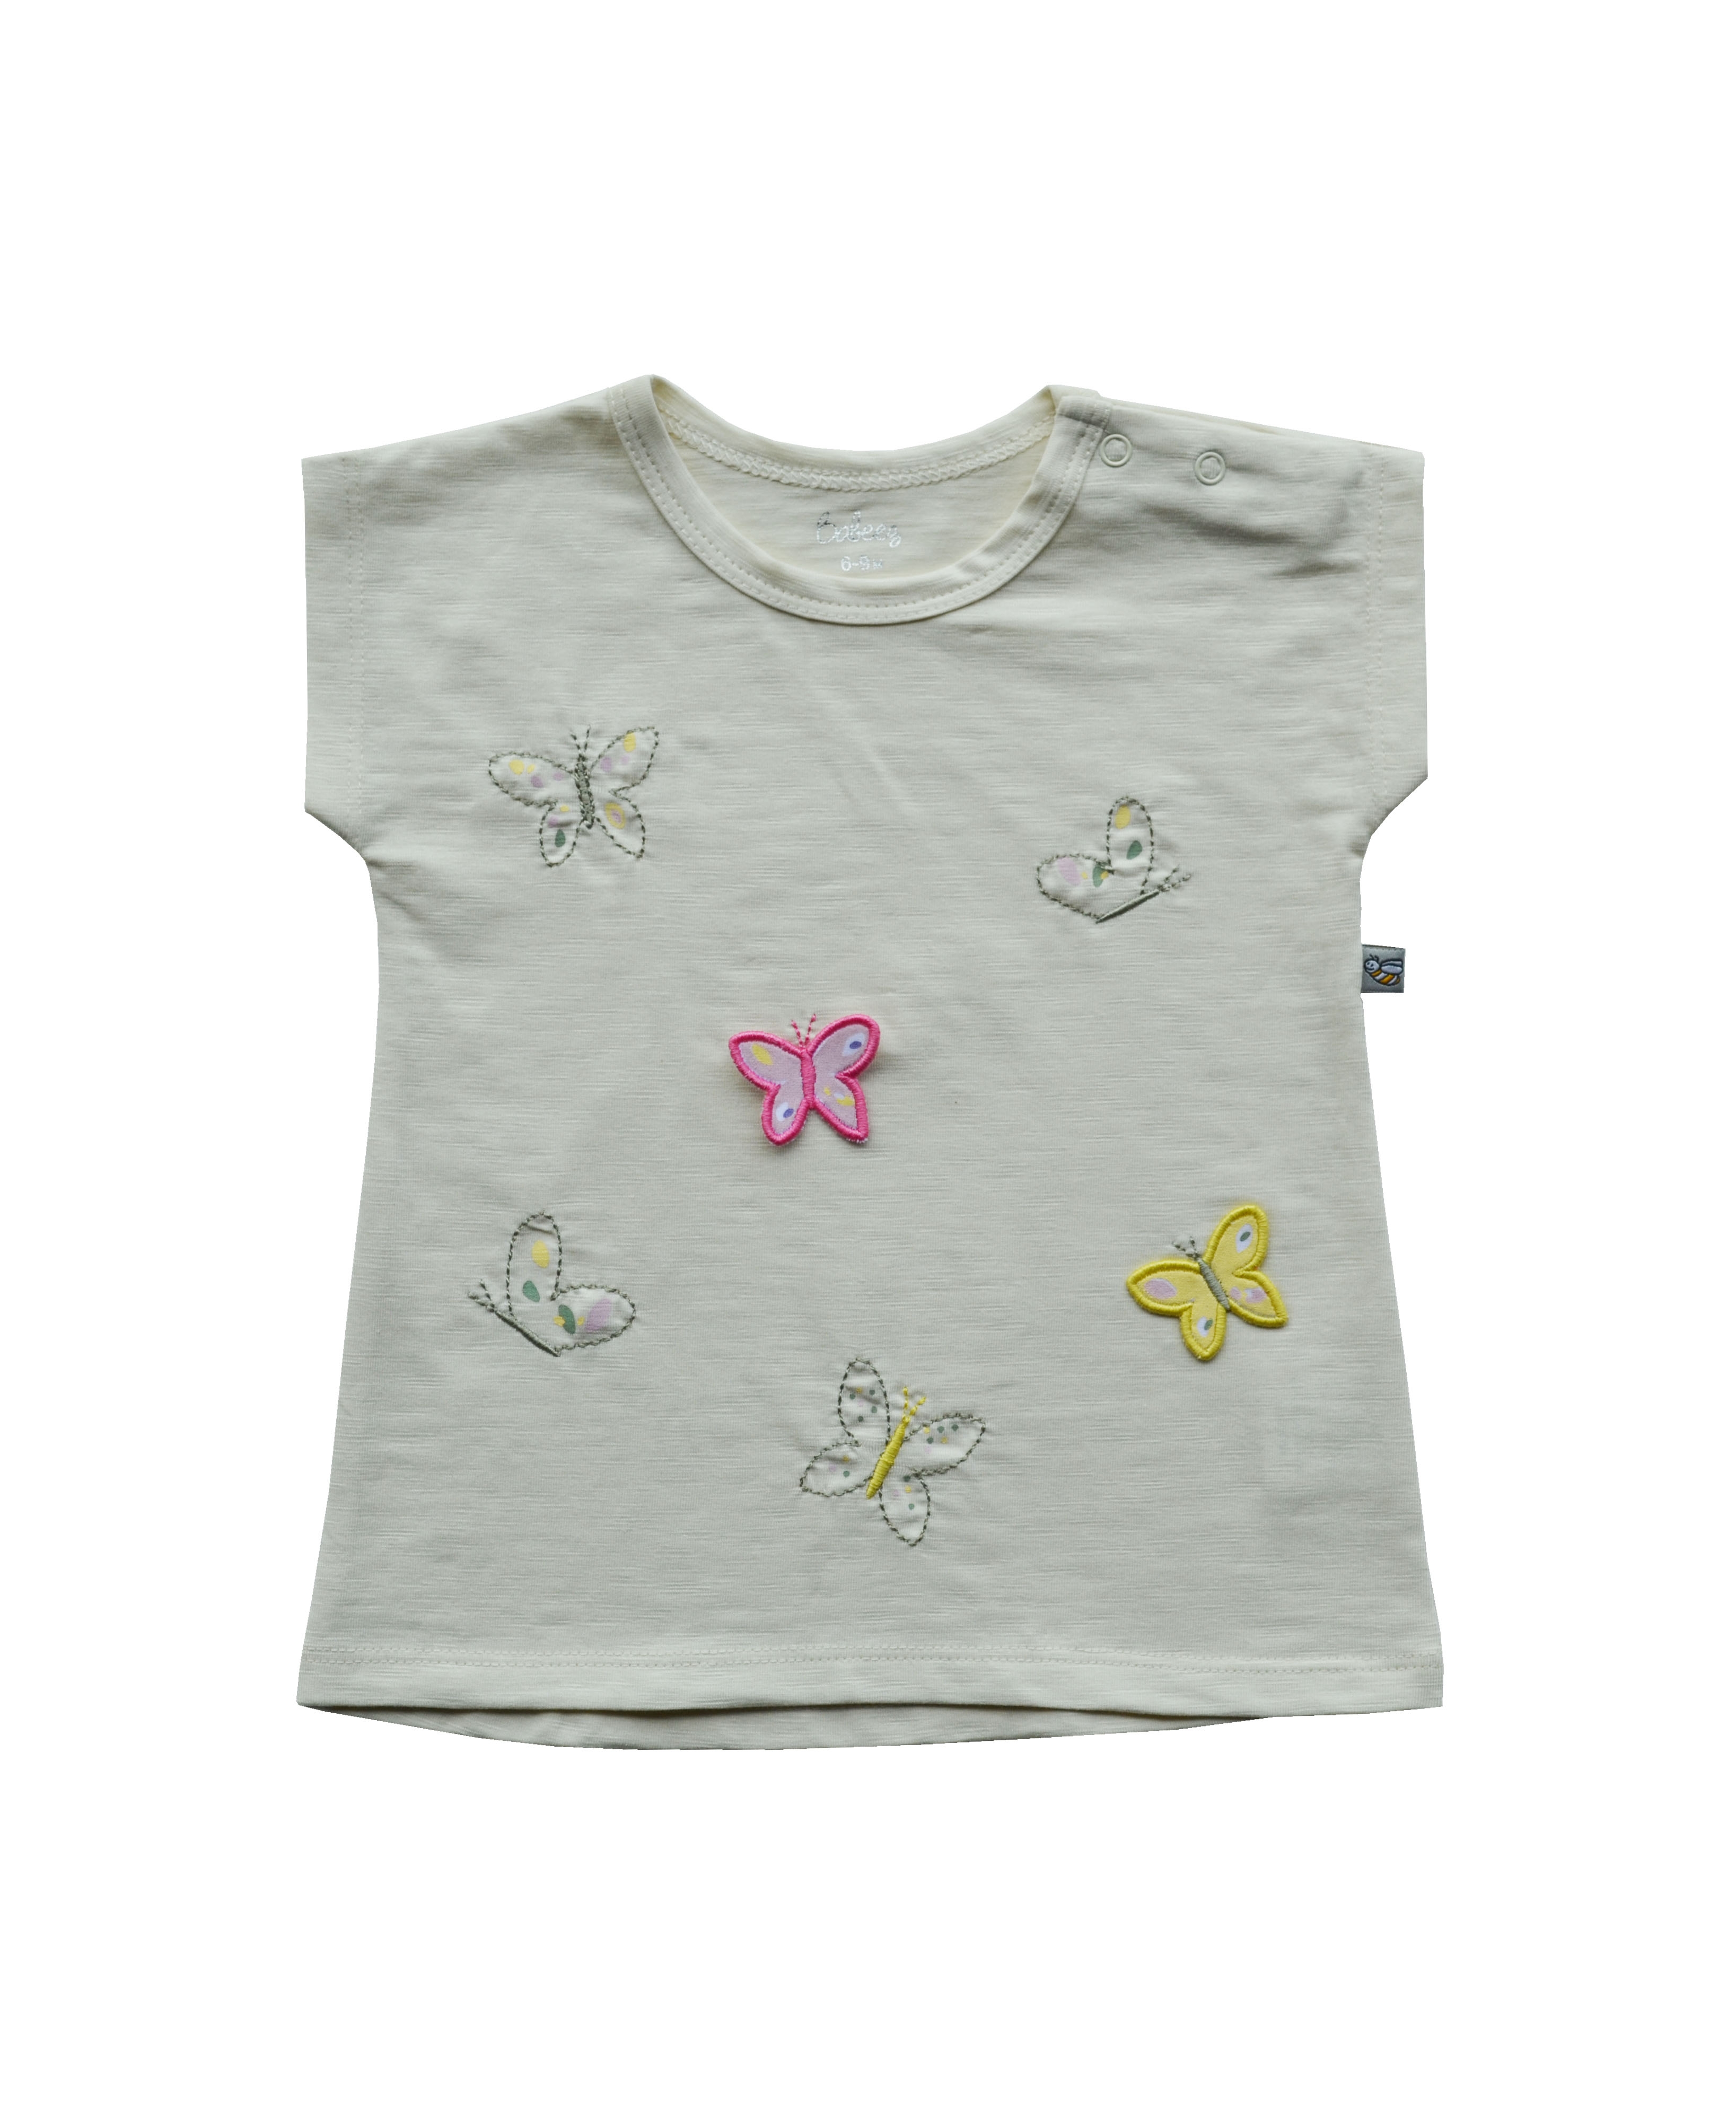 Girls Cream Top with Butterfly Applique(Slub Jersey)